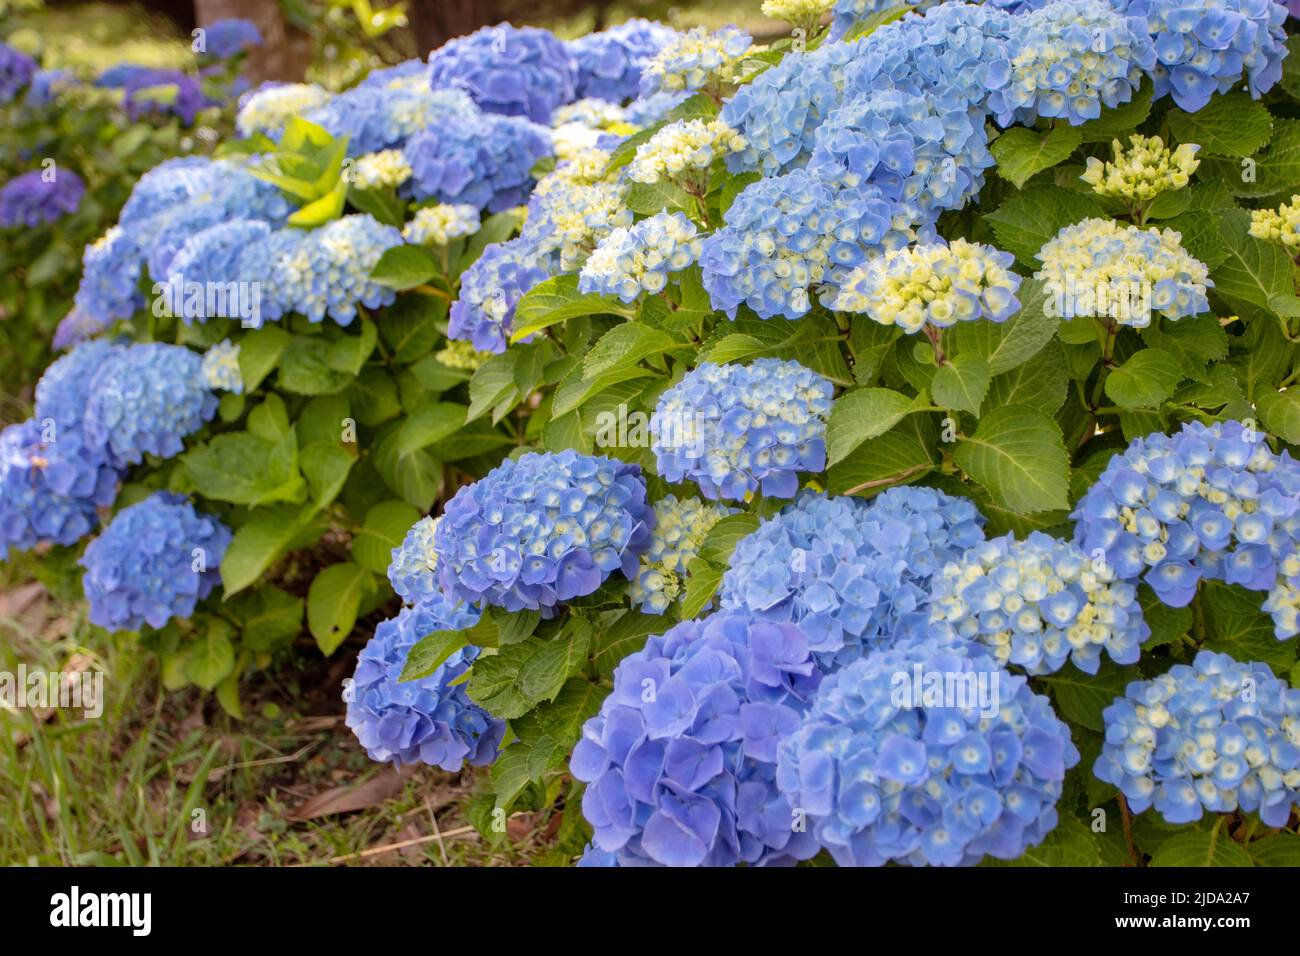 Blue hydrangea macrophylla flowers and yellow buds. Spectacular hortensia flowering plant. Stock Photo